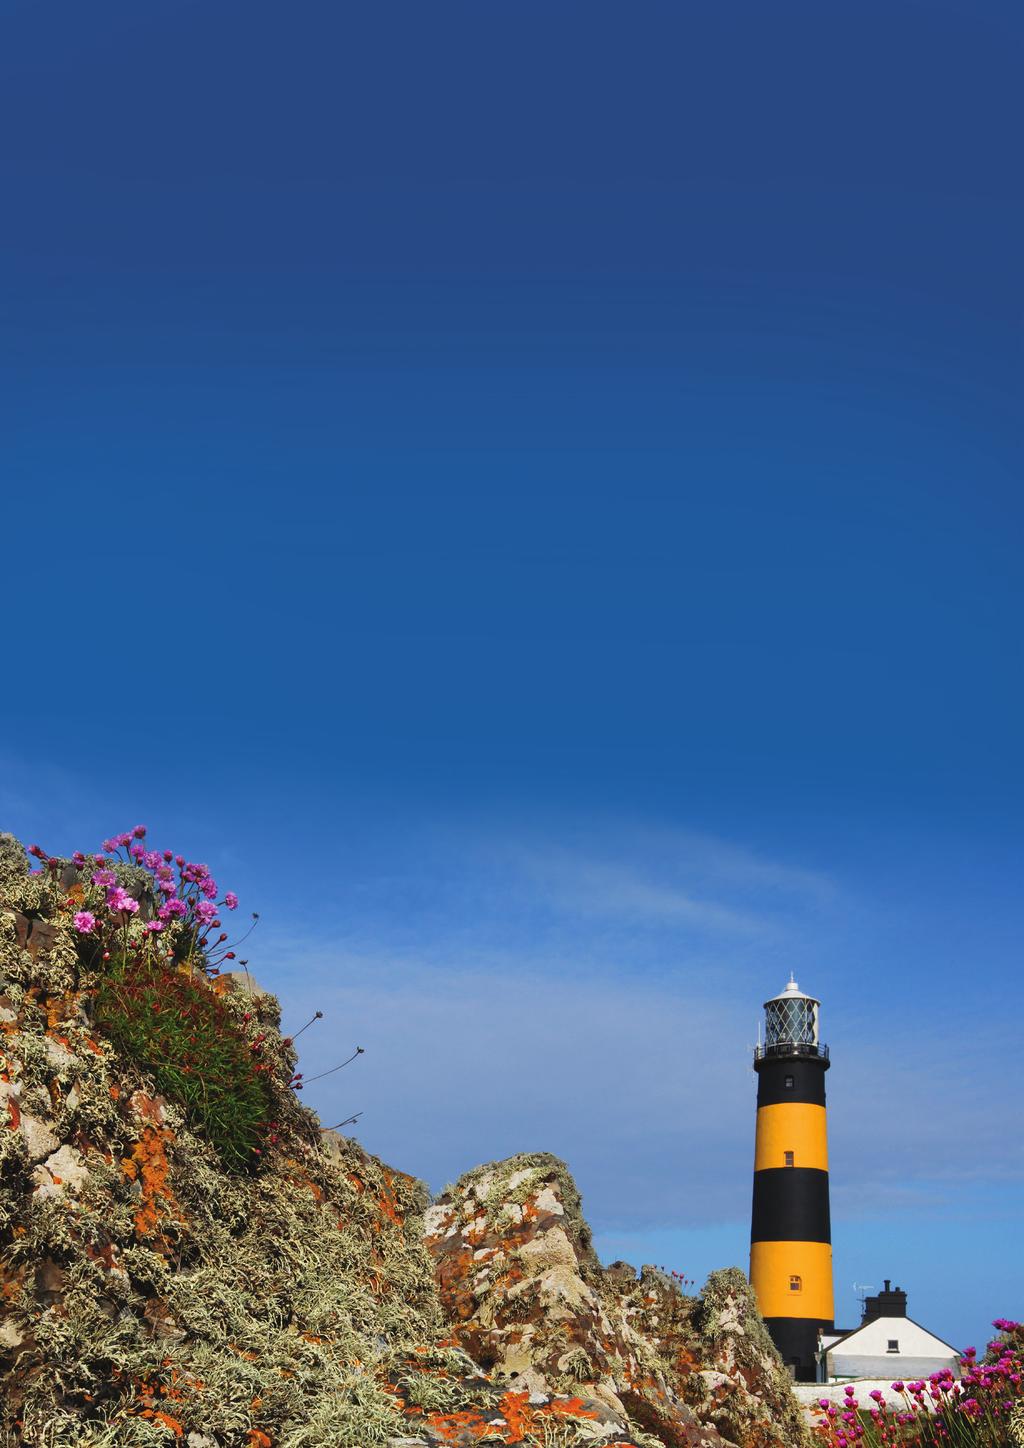 Great Lighthouse Competition WIN A FREE FAMILY BREAK St John s Point Lighthouse, County Down Take part in a coastal colouring competition to win a free family break at one of the lightkeepers